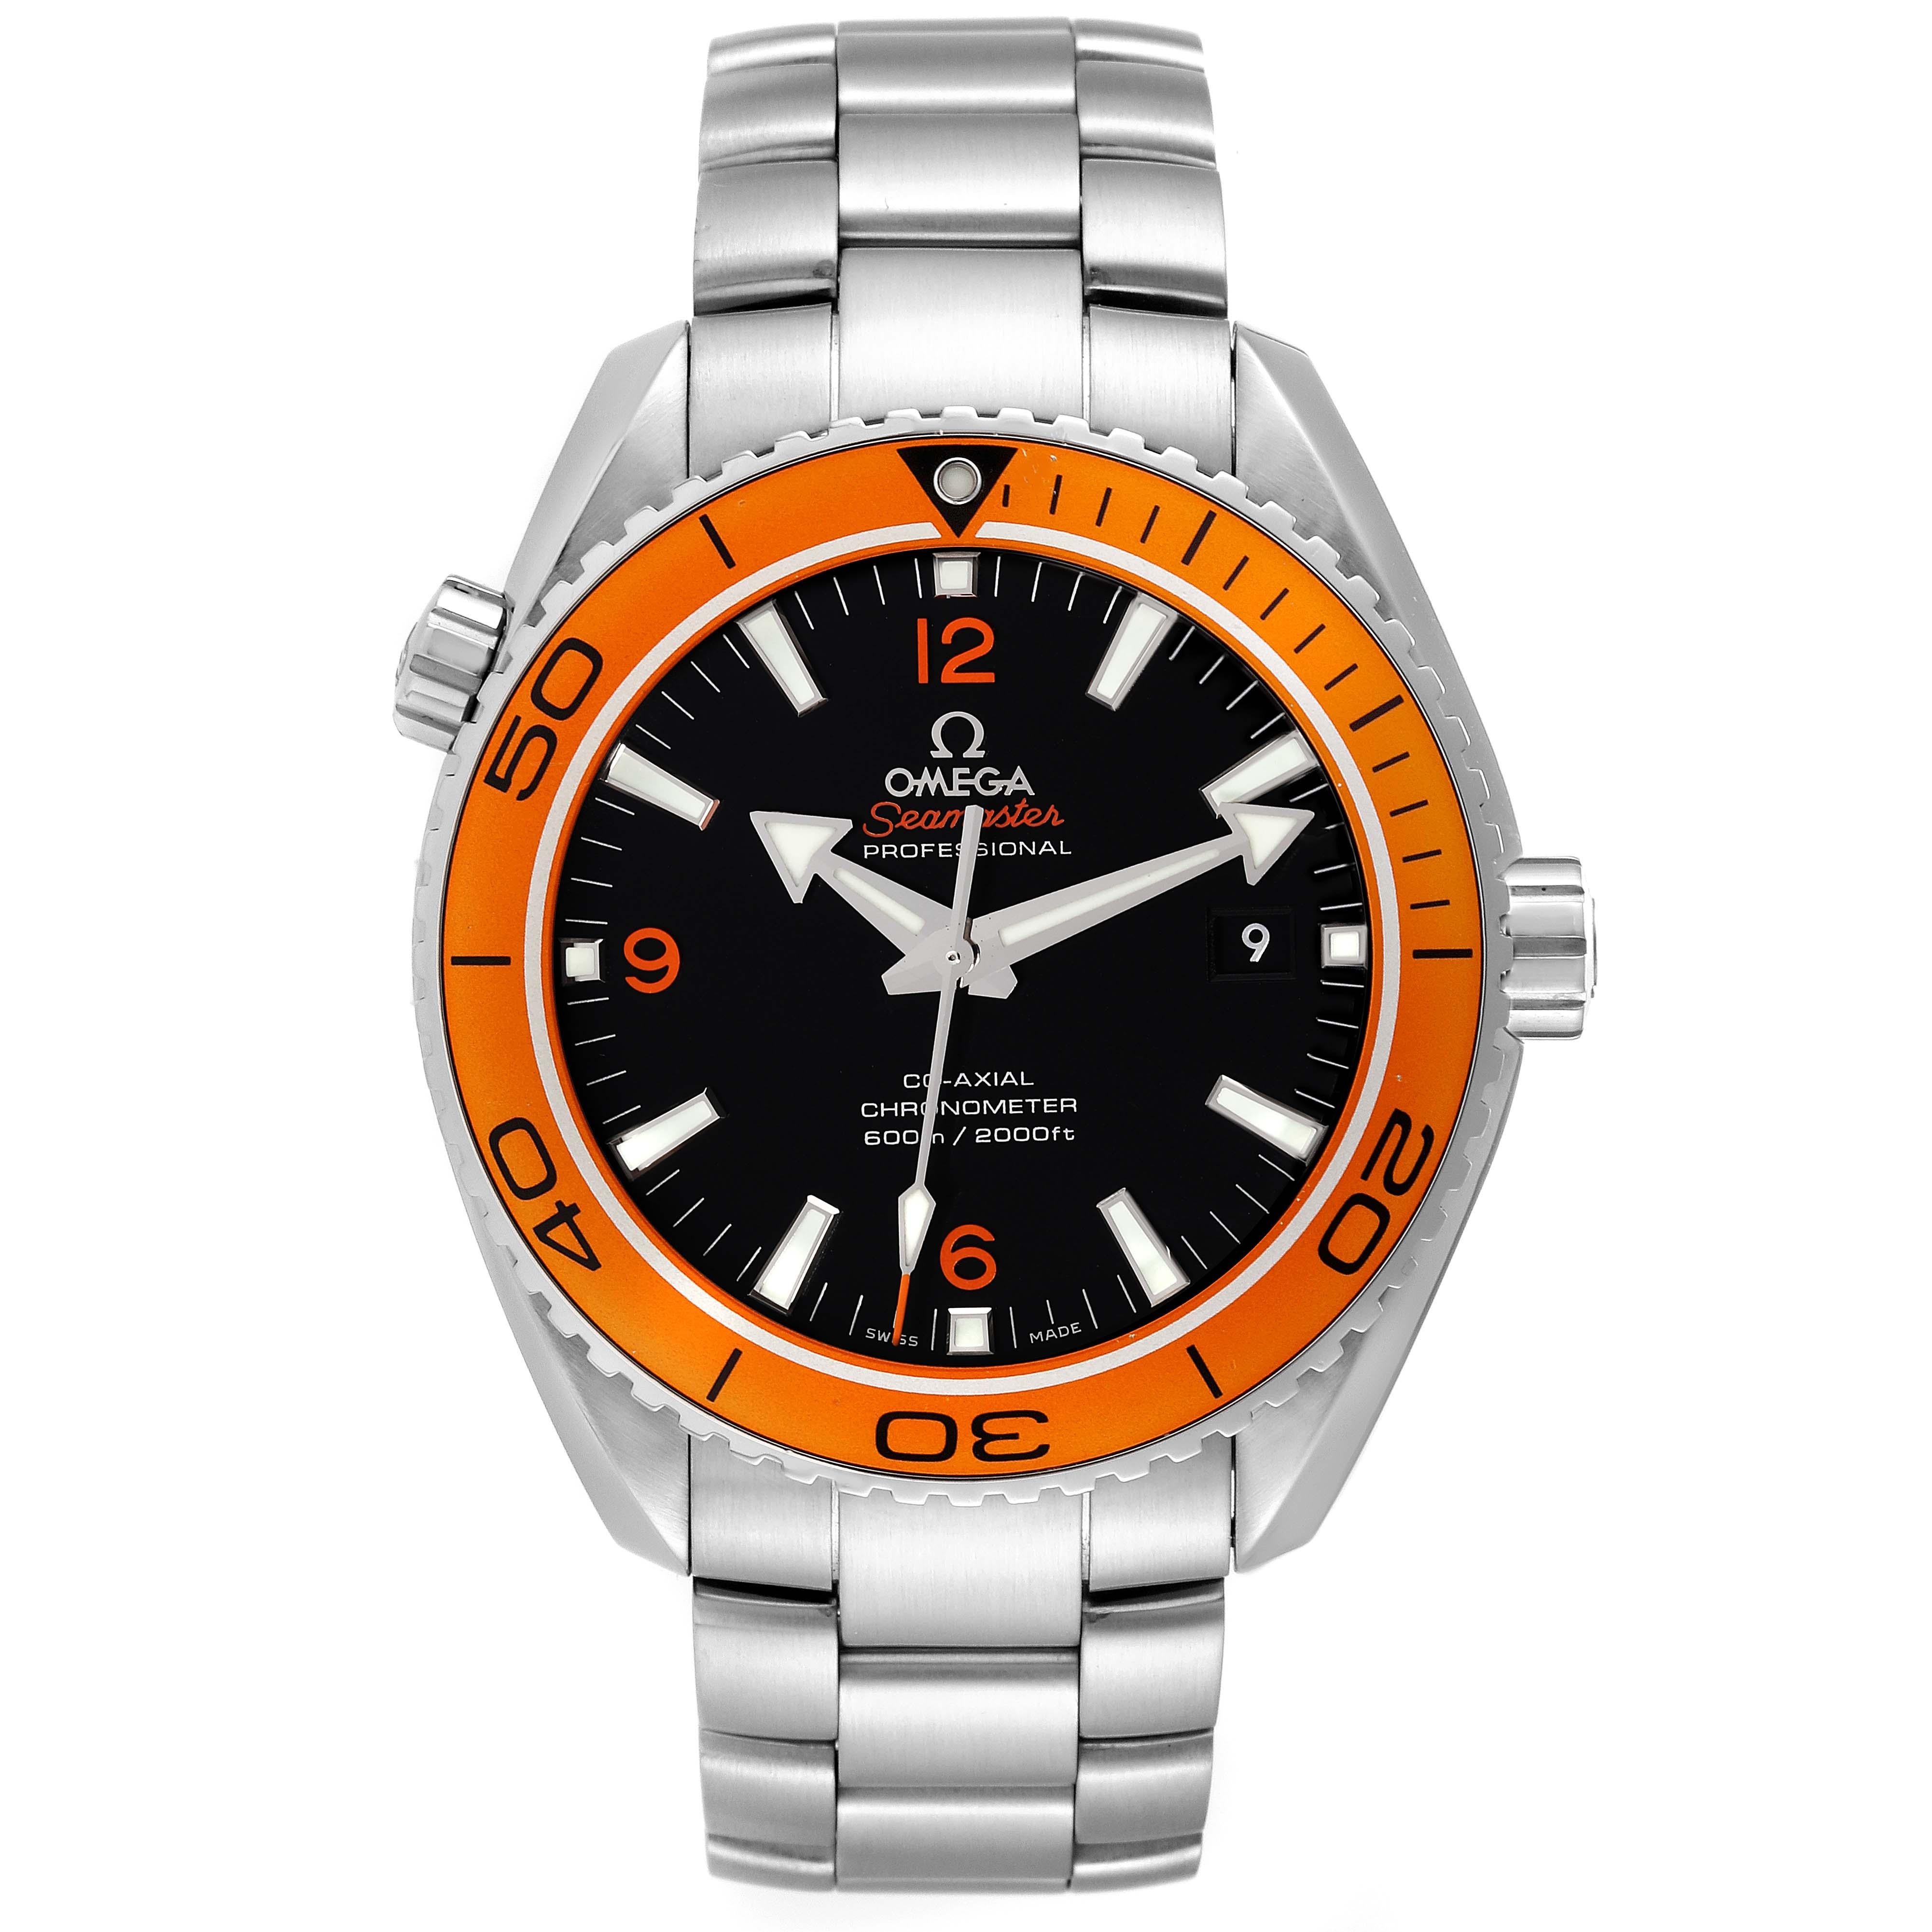 Omega Seamaster Planet Ocean Steel Mens Watch 232.30.42.21.01.002. Automatic self-winding chronometer movement with Co-Axial Escapement for greater precision, stability and durability. Free sprung-balance, 2 barrels mounted in series, automatic